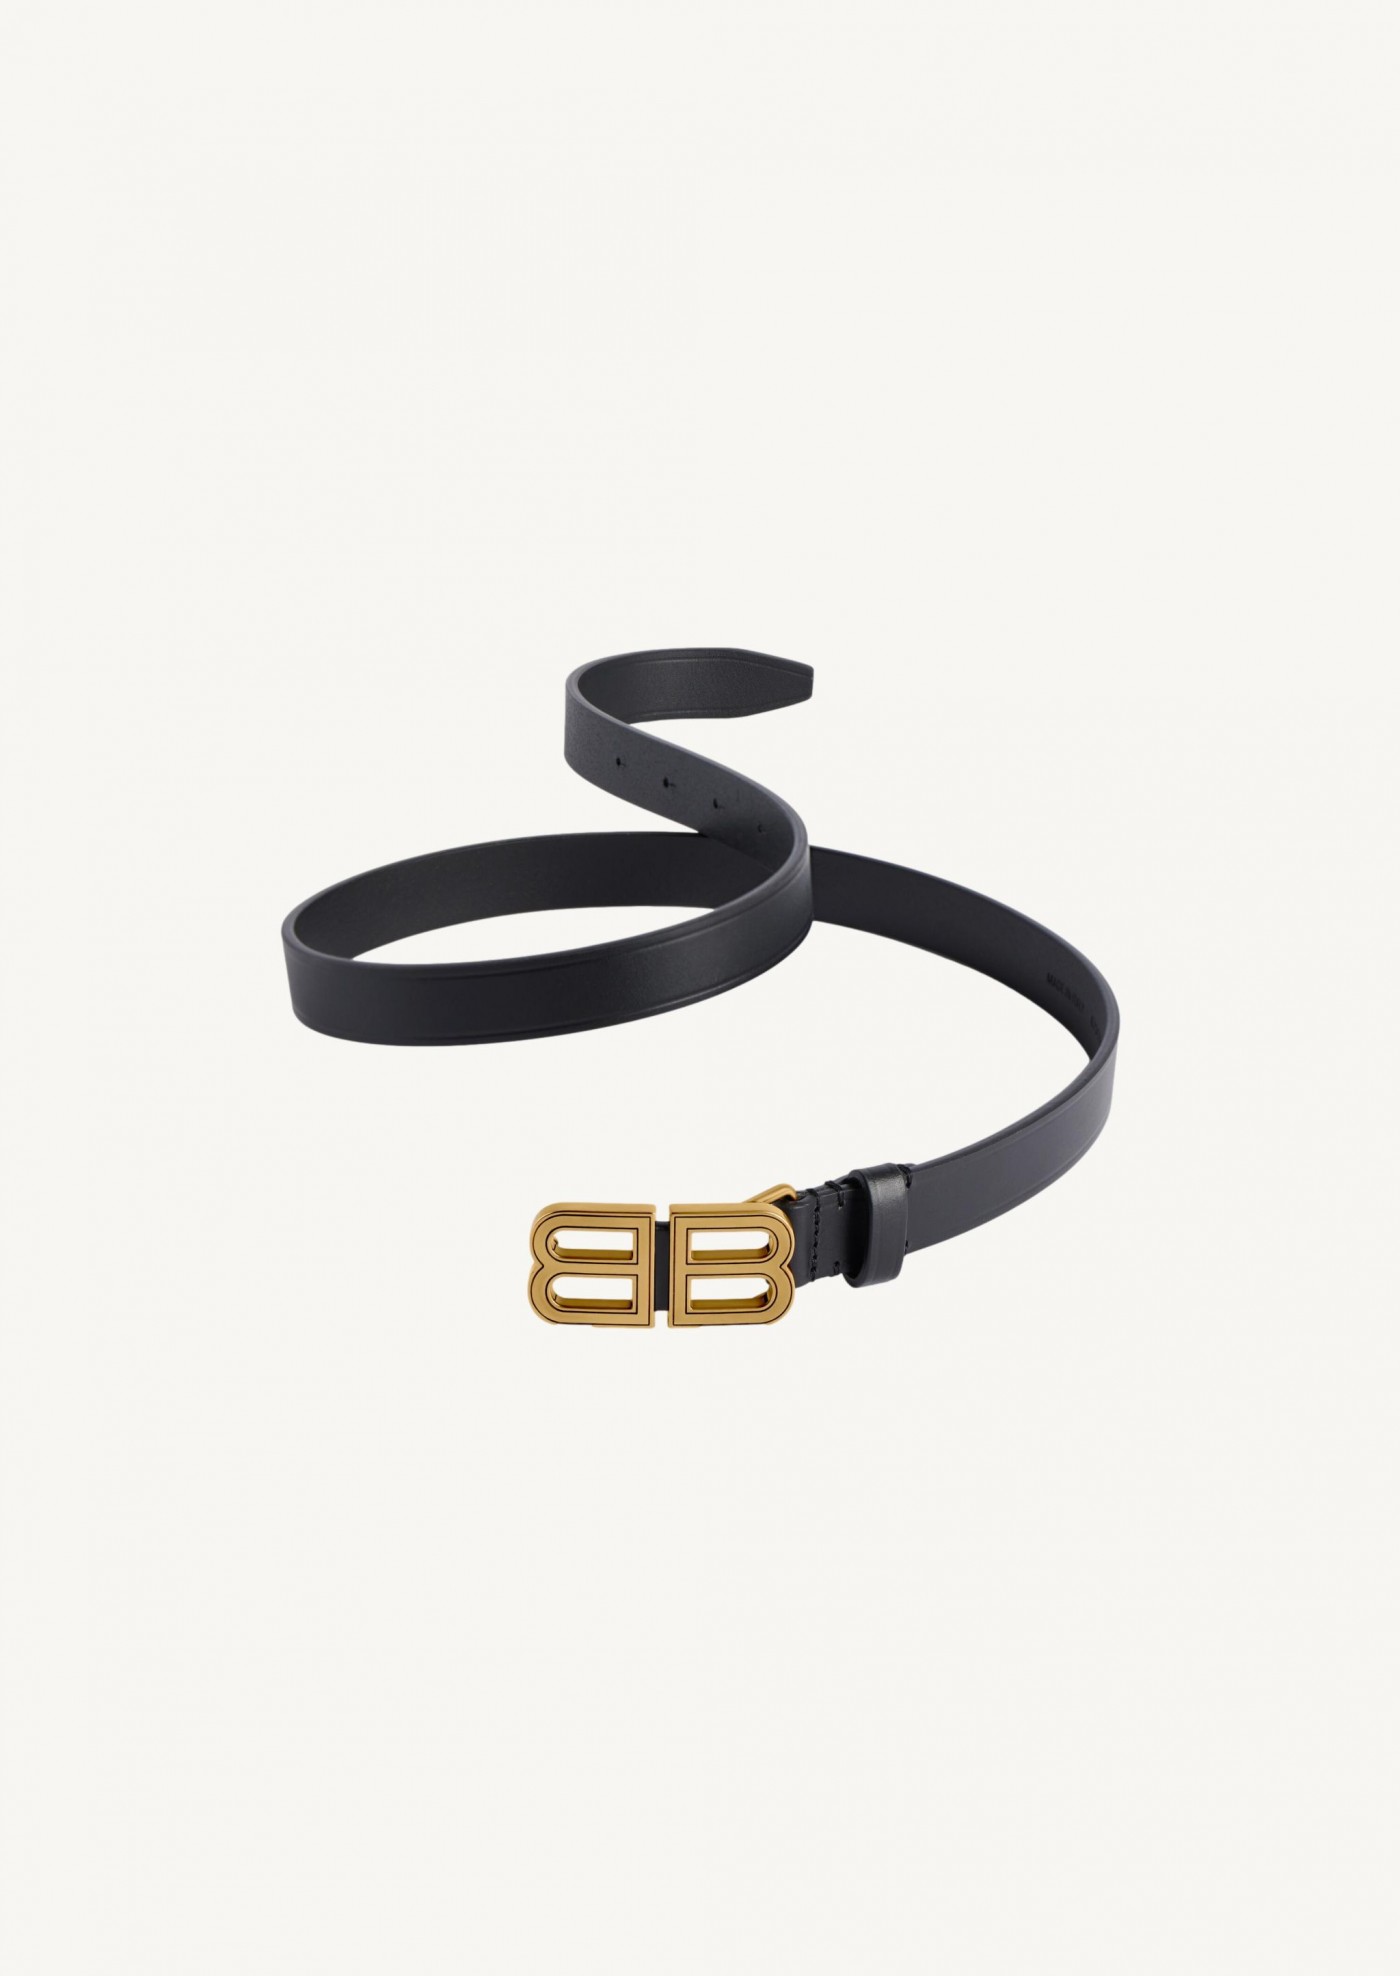 BB hourglass thin belt in black and gold